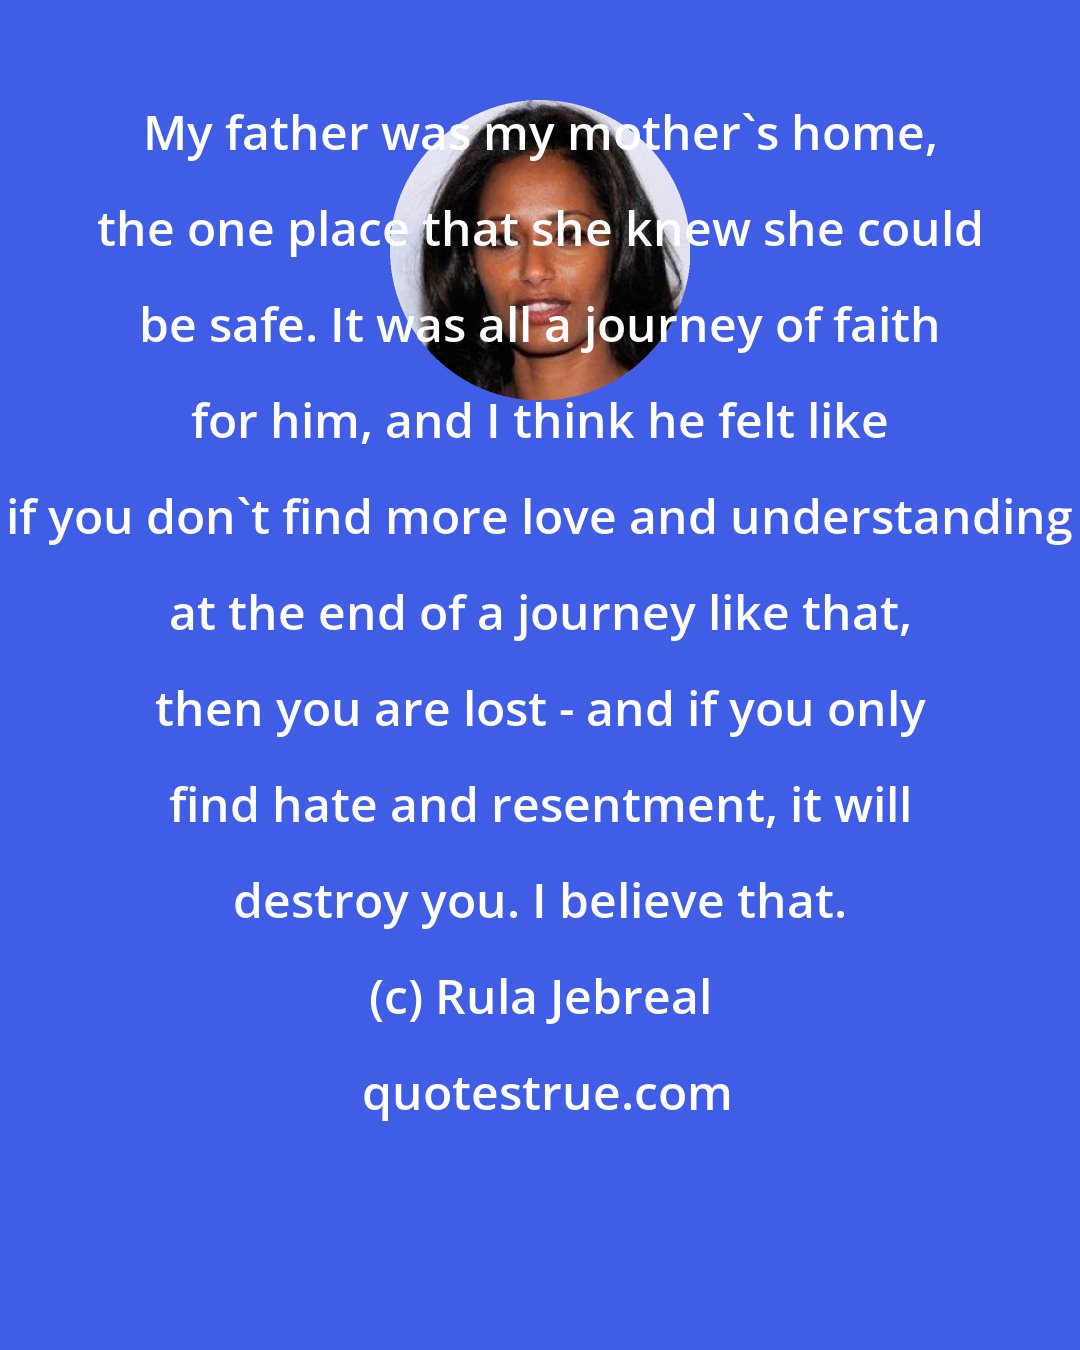 Rula Jebreal: My father was my mother's home, the one place that she knew she could be safe. It was all a journey of faith for him, and I think he felt like if you don't find more love and understanding at the end of a journey like that, then you are lost - and if you only find hate and resentment, it will destroy you. I believe that.